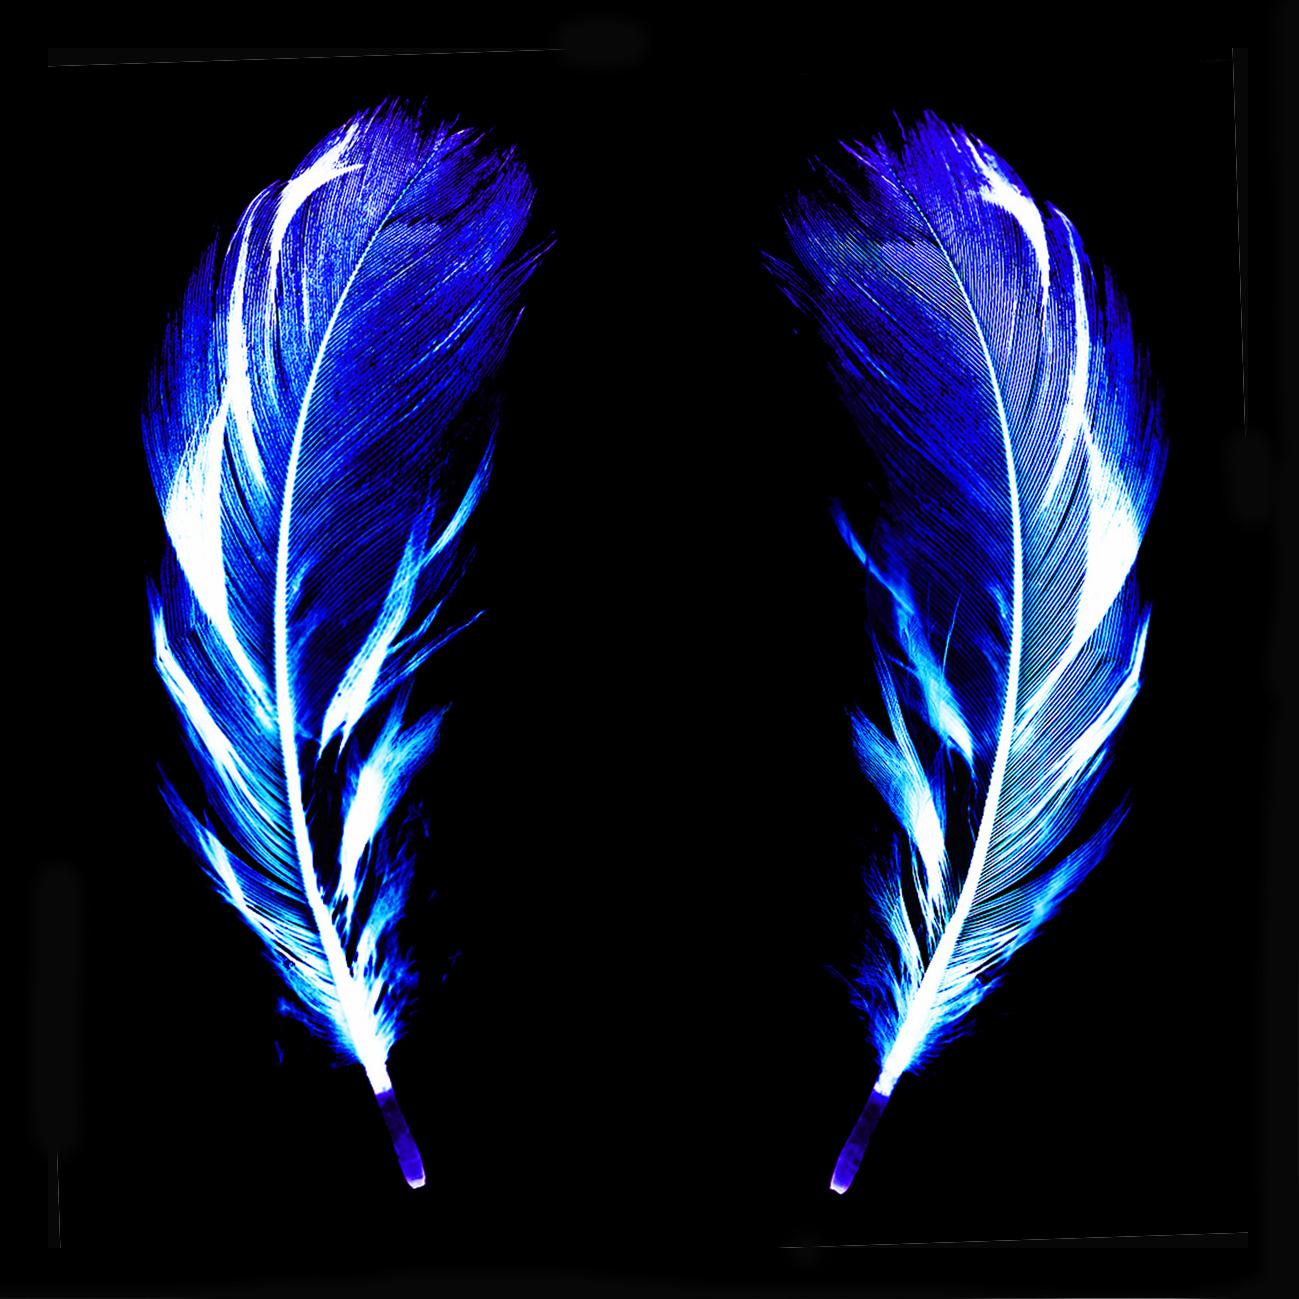 Flight of Fancy - Electric Blue Feathers - Conceptual, Color Photography 